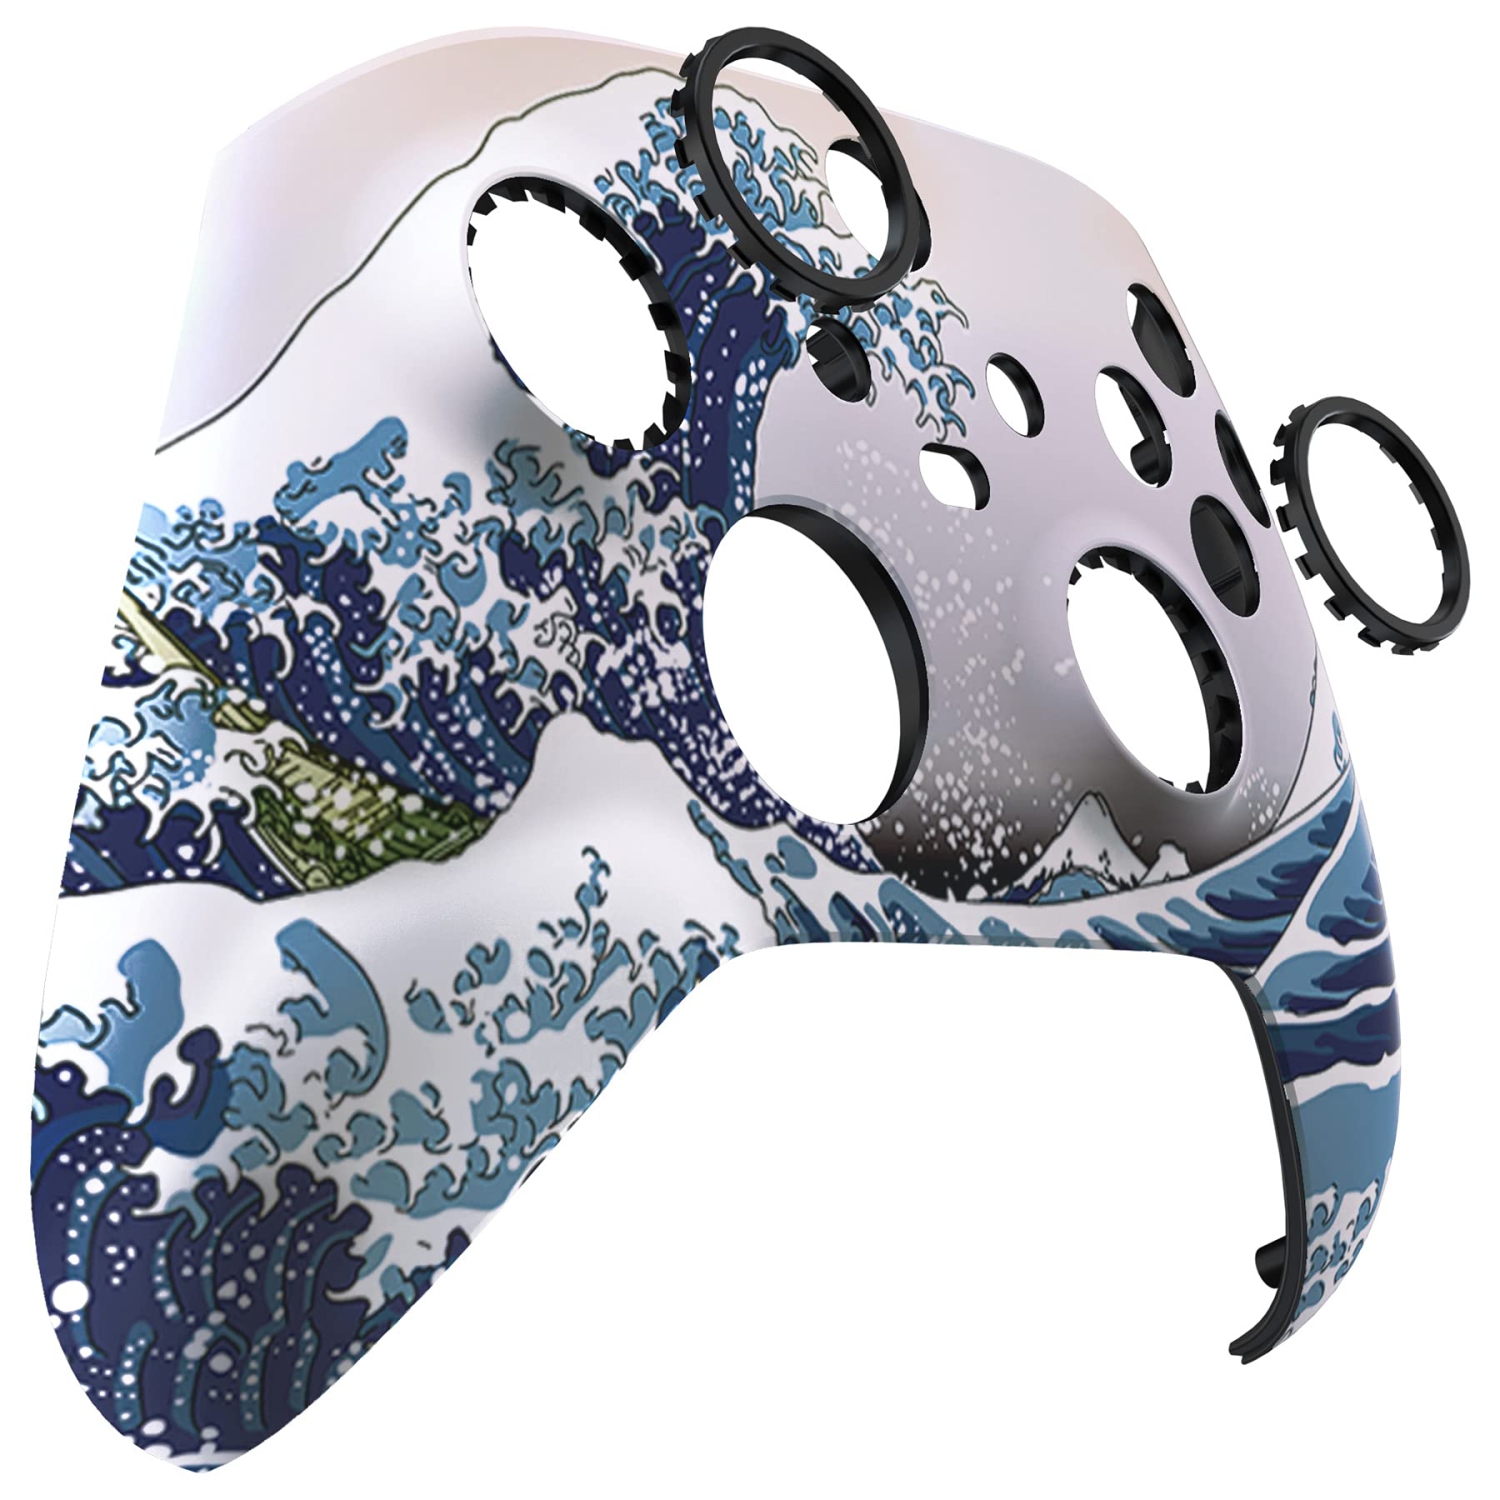 The Great Wave ASR Version Front Housing Shell w/Accent Rings for Xbox Series X/S Controller, Soft Touch Cover Faceplate for Xbox Core Controller Model 1914